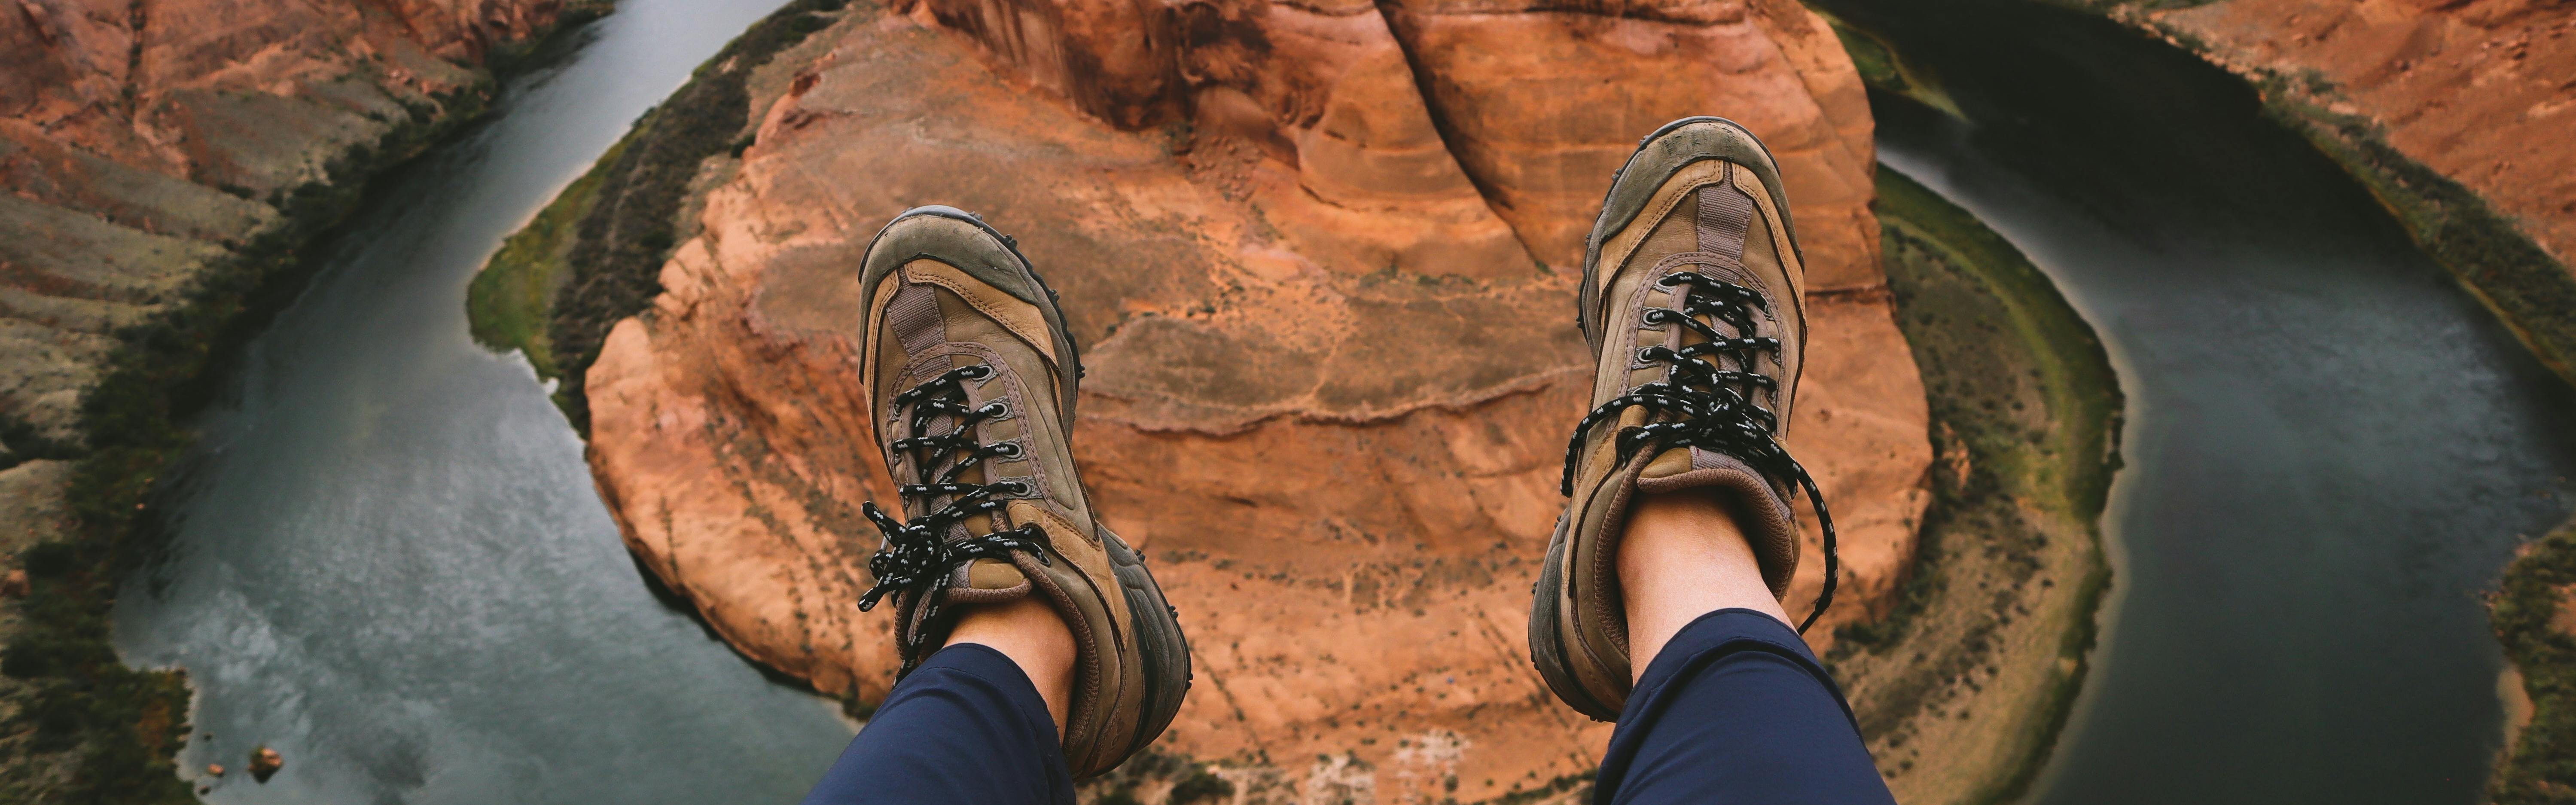 Two feet wearing hiking boots extend over a rounded river gorge